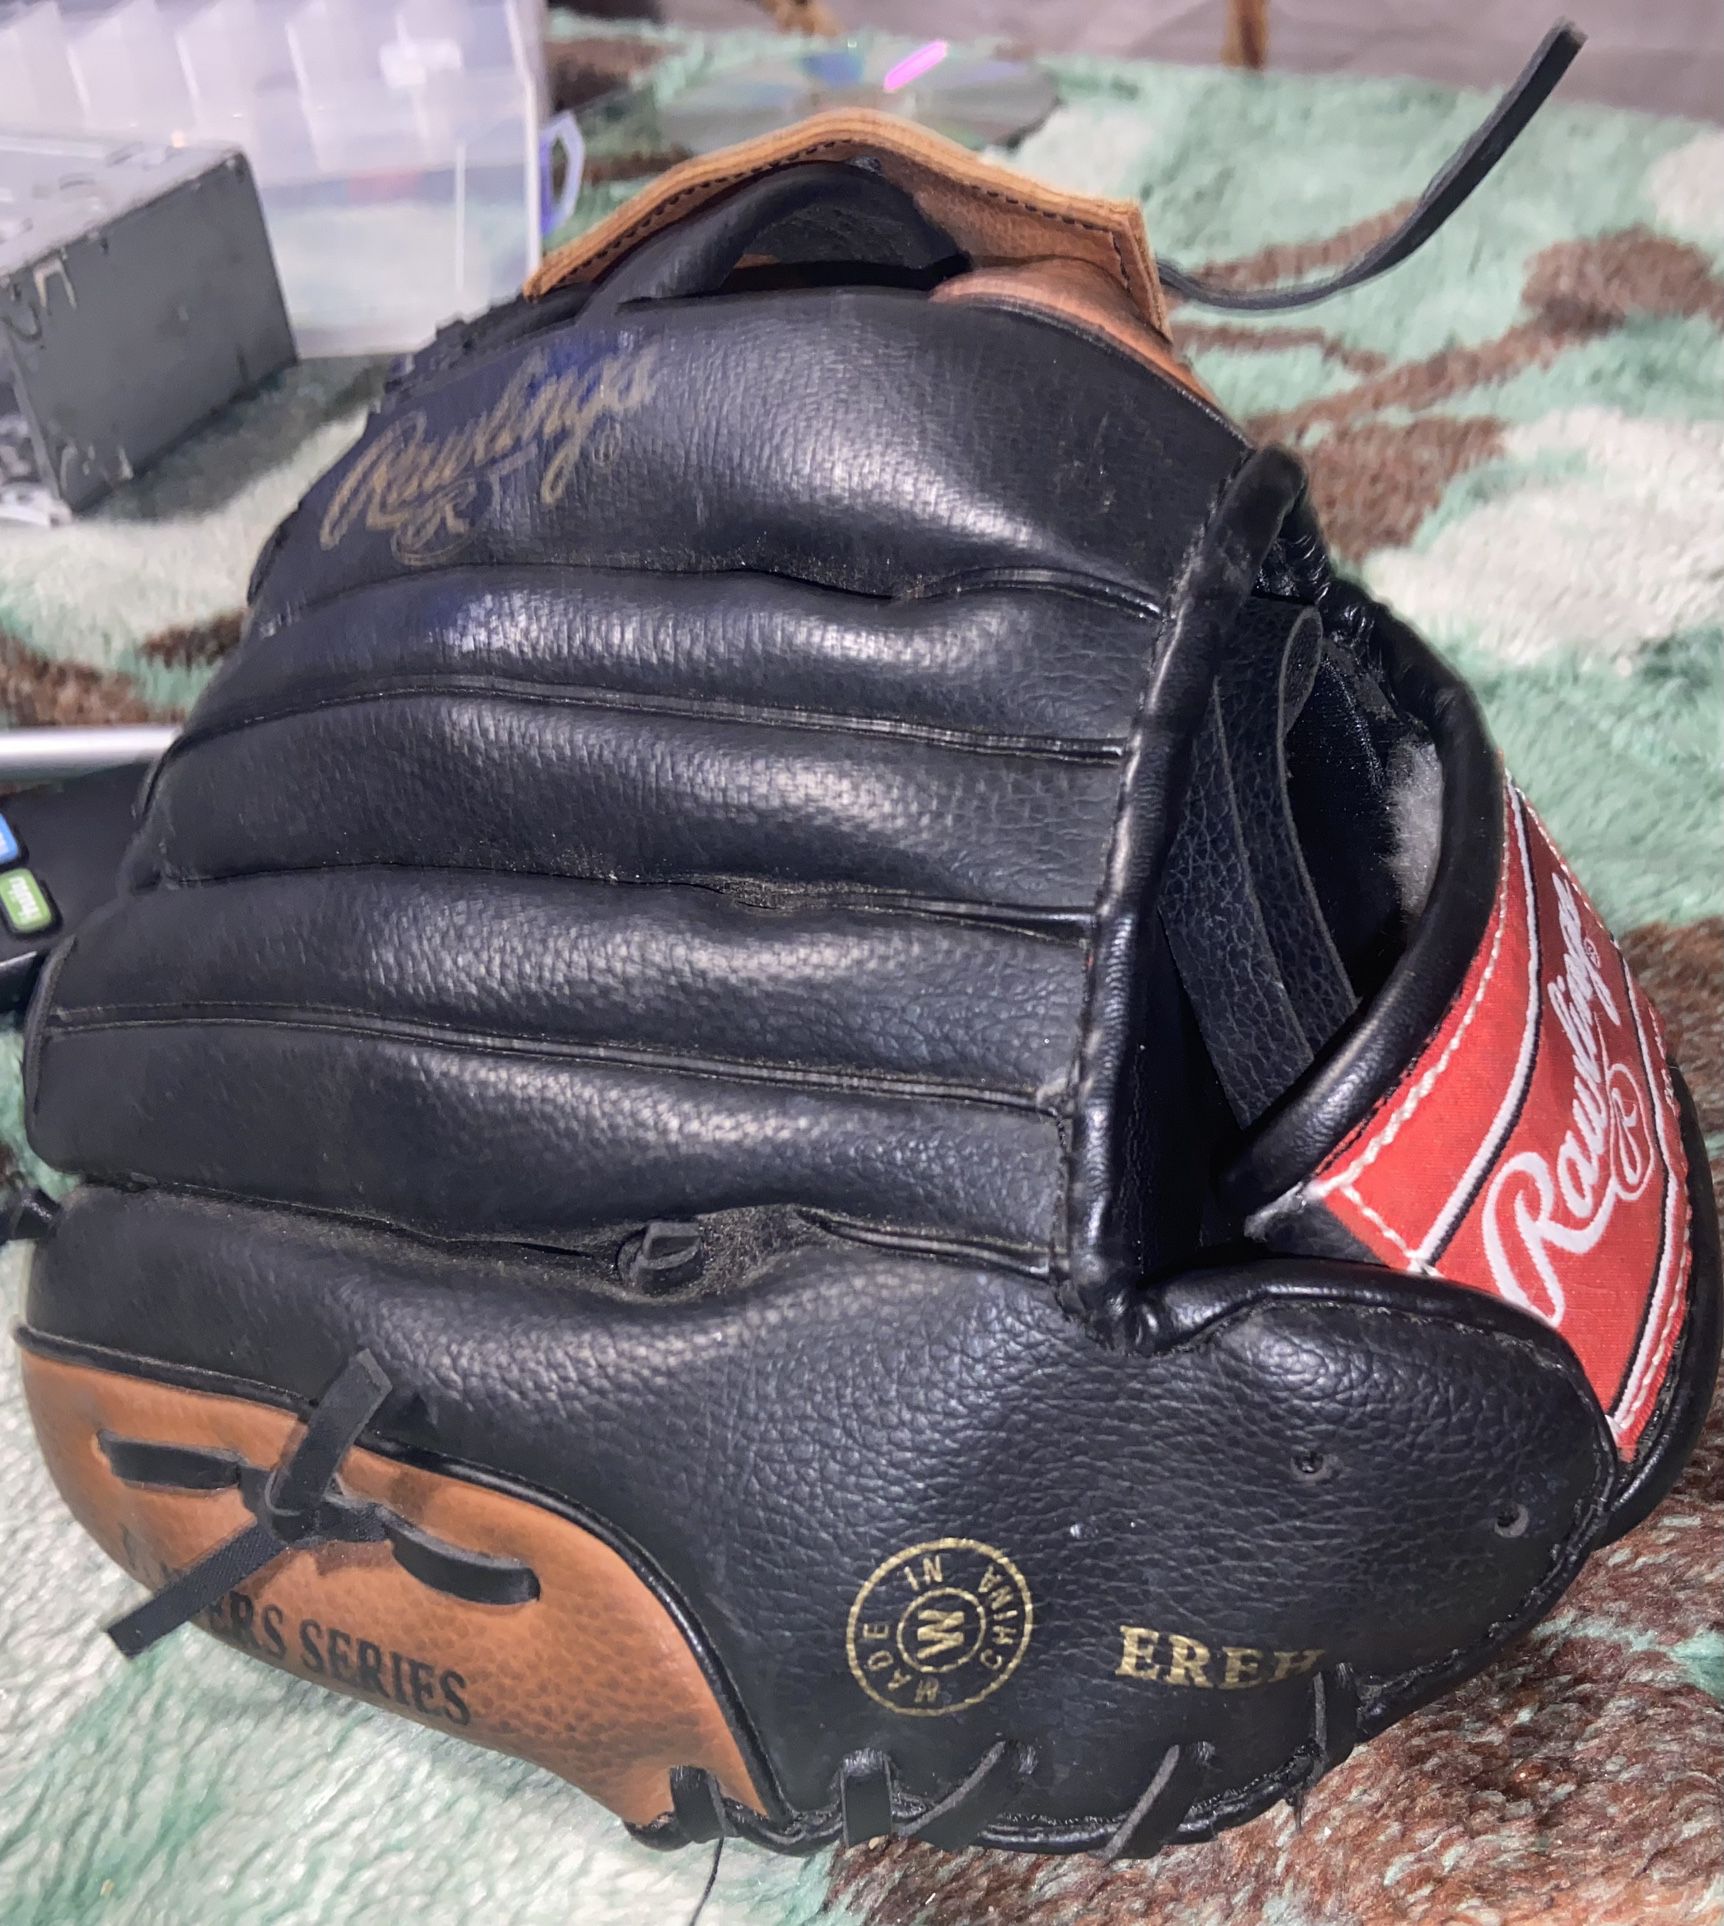 Gently used Rawlings PL15WB Baseball Glove 10 1/2” Genuine Leather Mitt Players Series RHT in great 